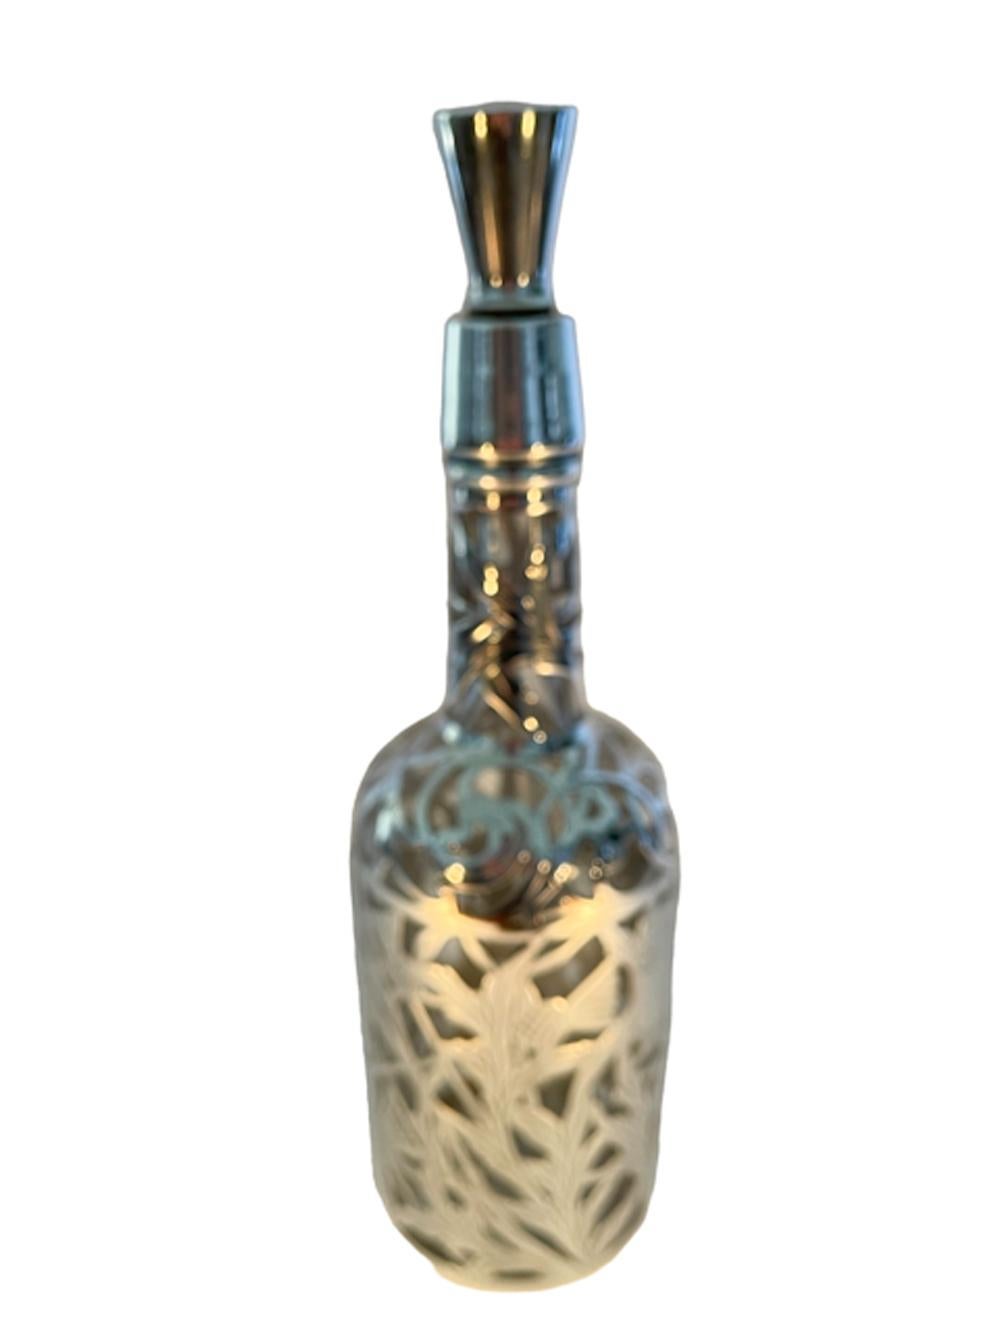 Art Nouveau Silver Overlay Decanter or Back Bar Bottle with Thistle Design  In Good Condition For Sale In Nantucket, MA